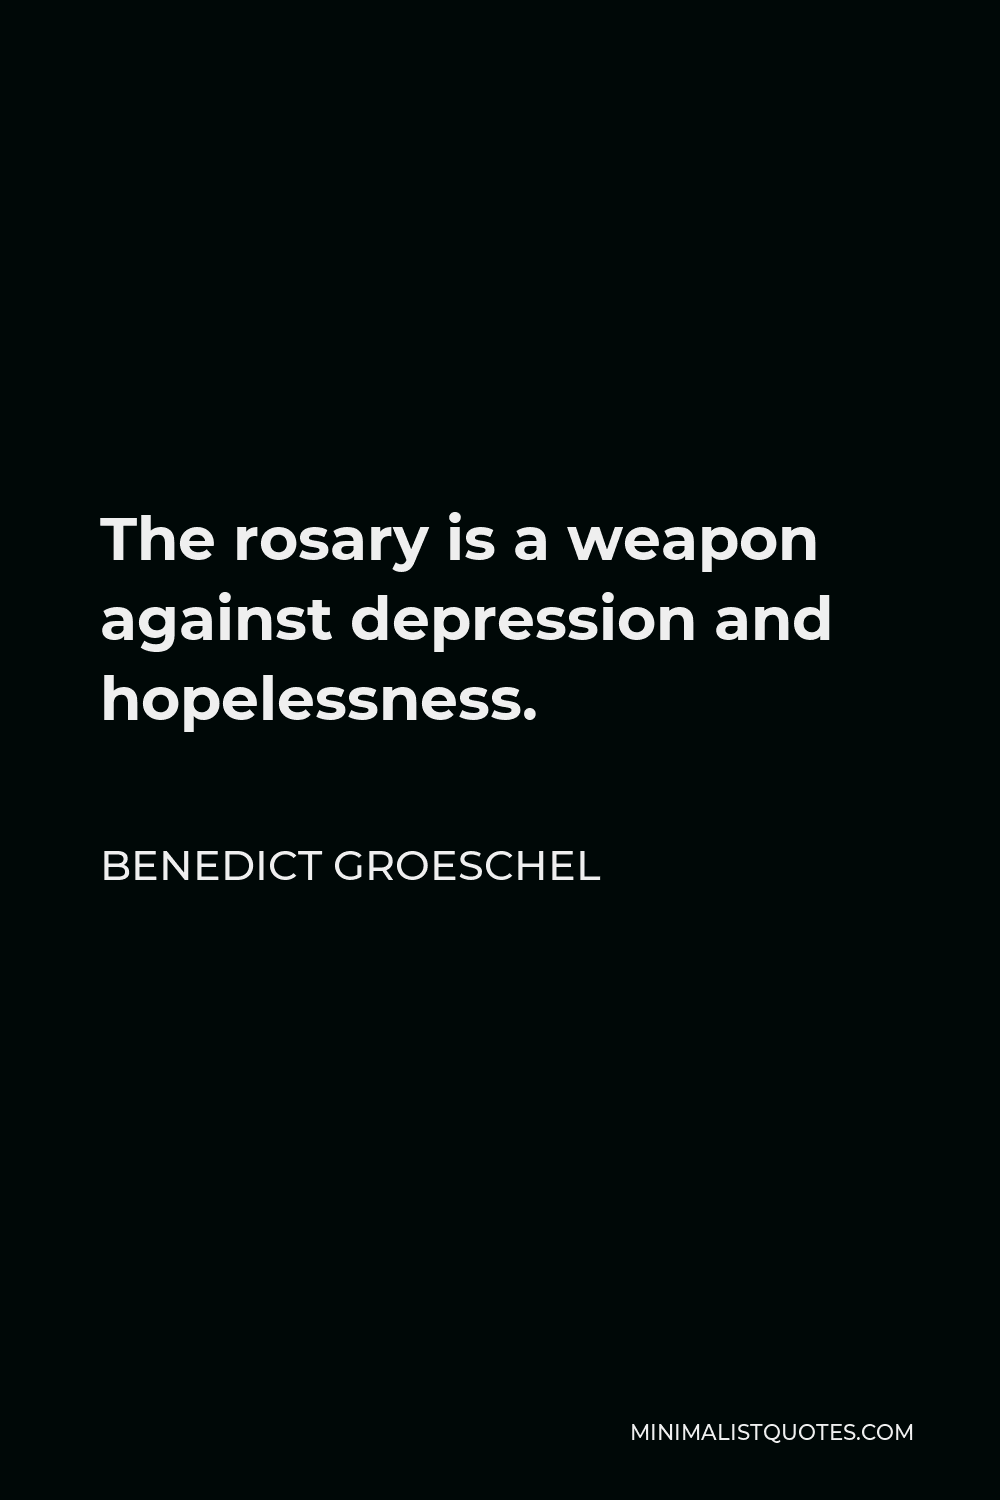 Benedict Groeschel Quote - The rosary is a weapon against depression and hopelessness.